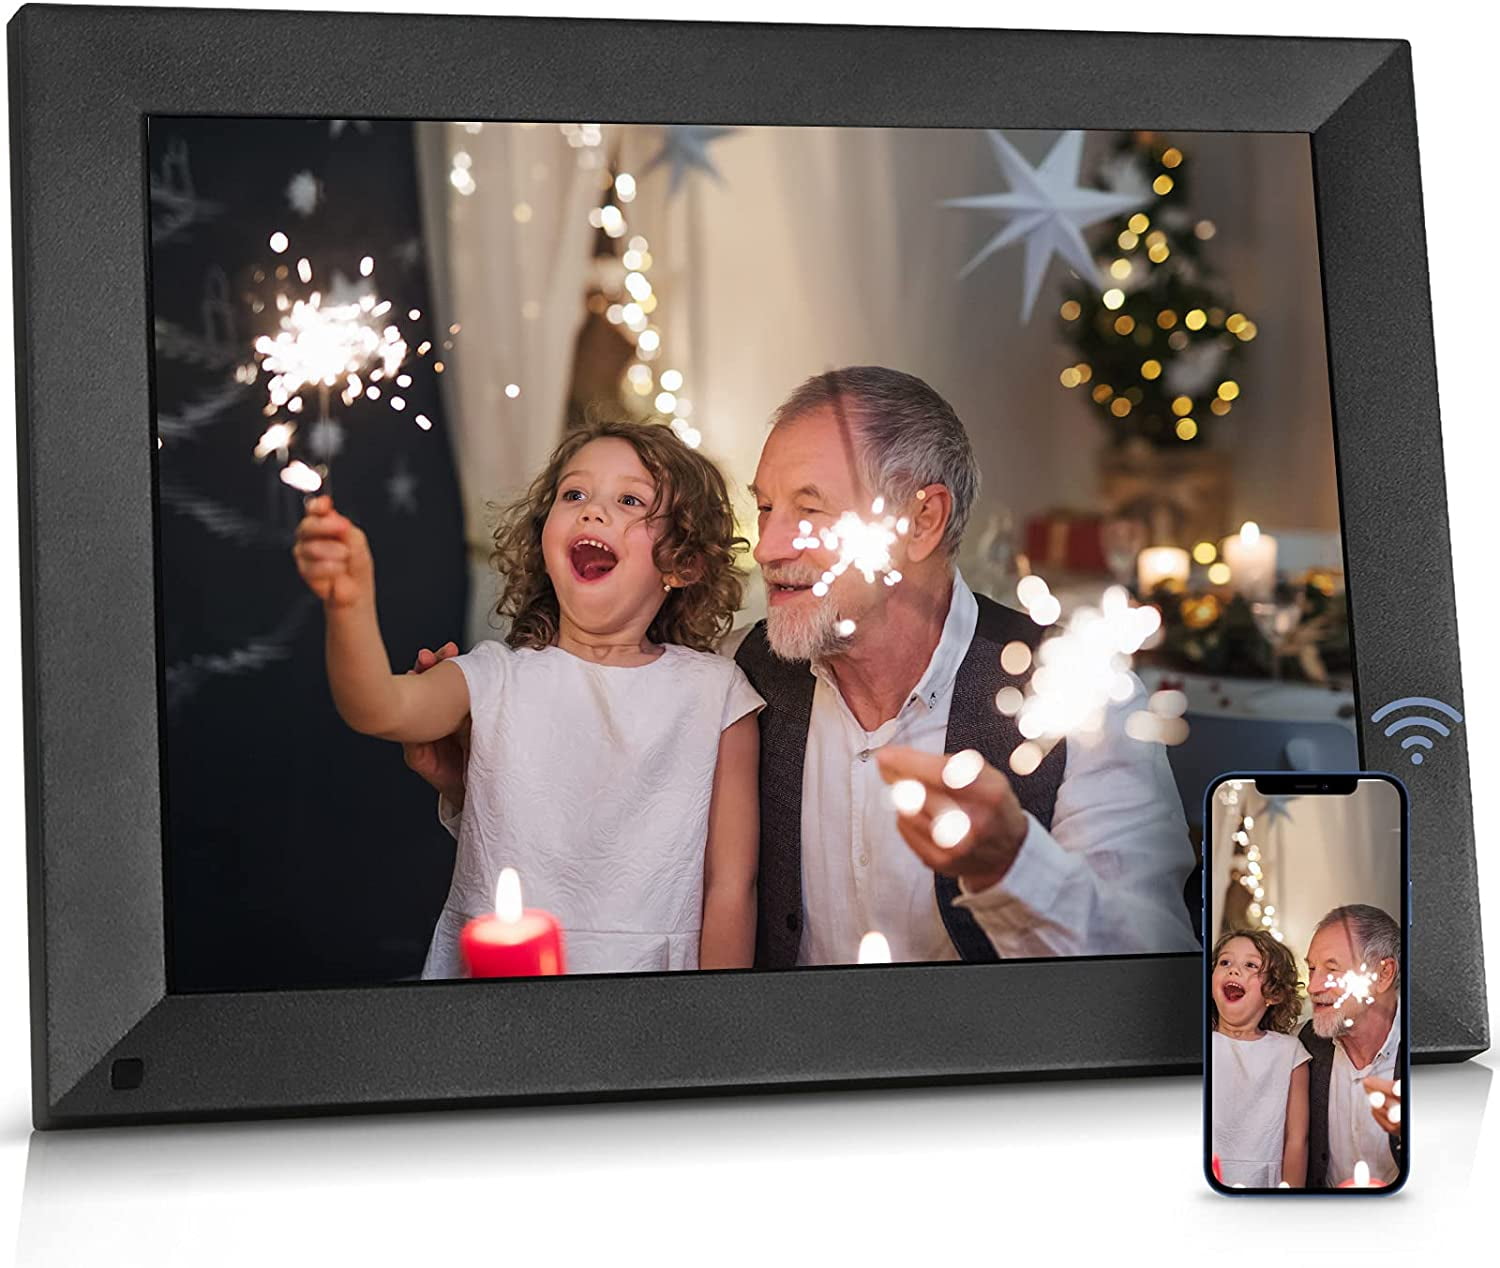 BSIMB 32GB 10.1 Inch WiFi Digital Photo Frame, 1280x800 IPS Touch Screen  Auto Rotate Motion Sensor Upload Photos/Videos via App/Email, Gift for  Grandparents